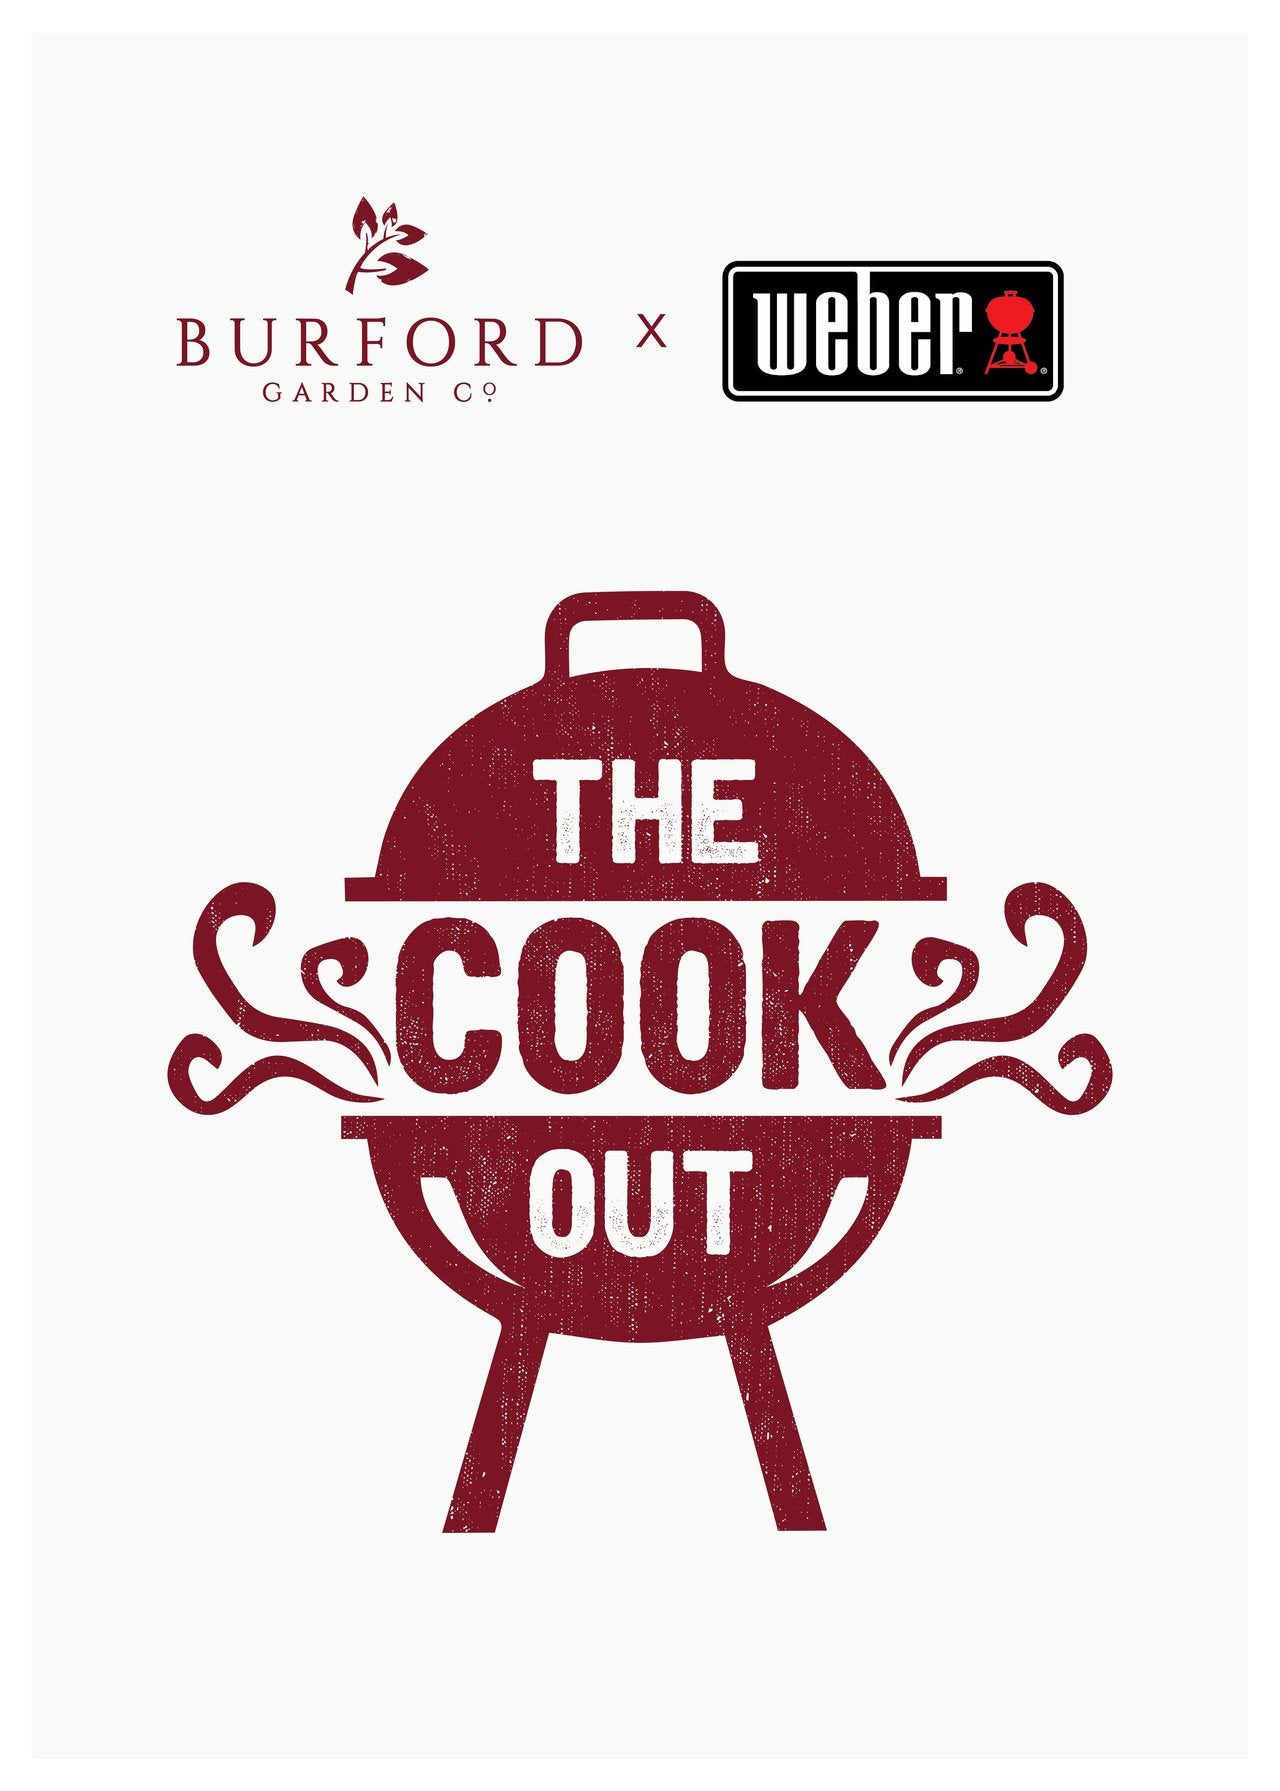 'The Cookout' with Weber